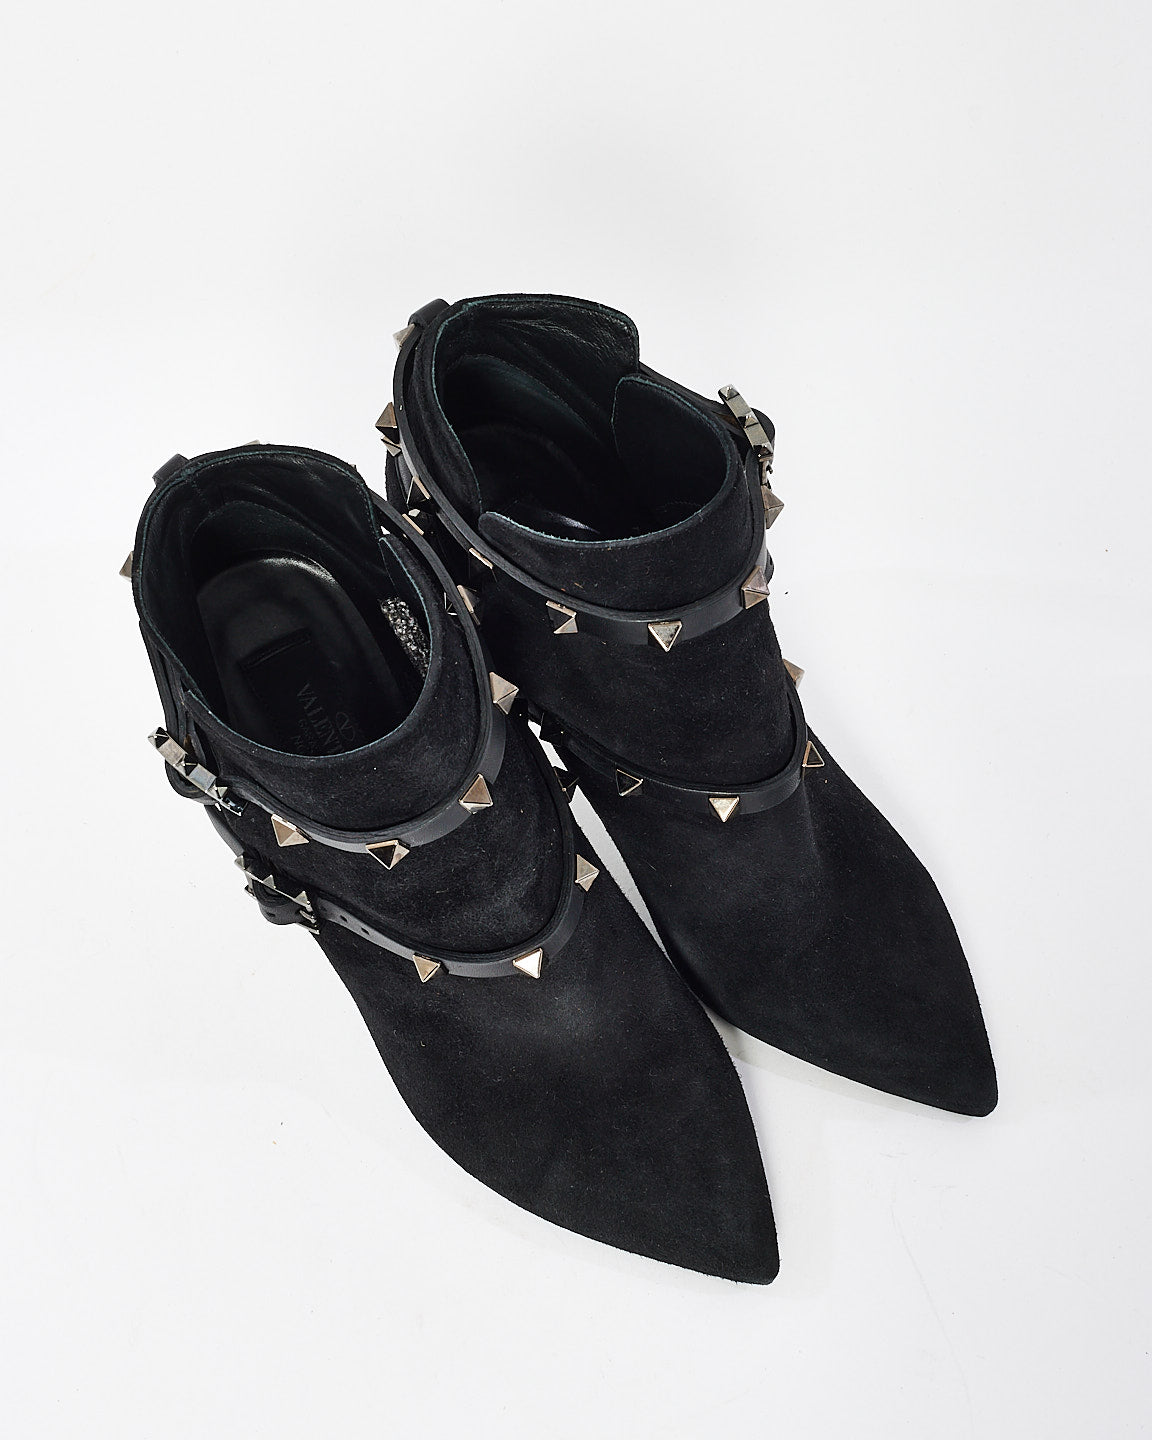 Valentino Black Suede Pointed Toe Rockstud Ankle Booties - 37